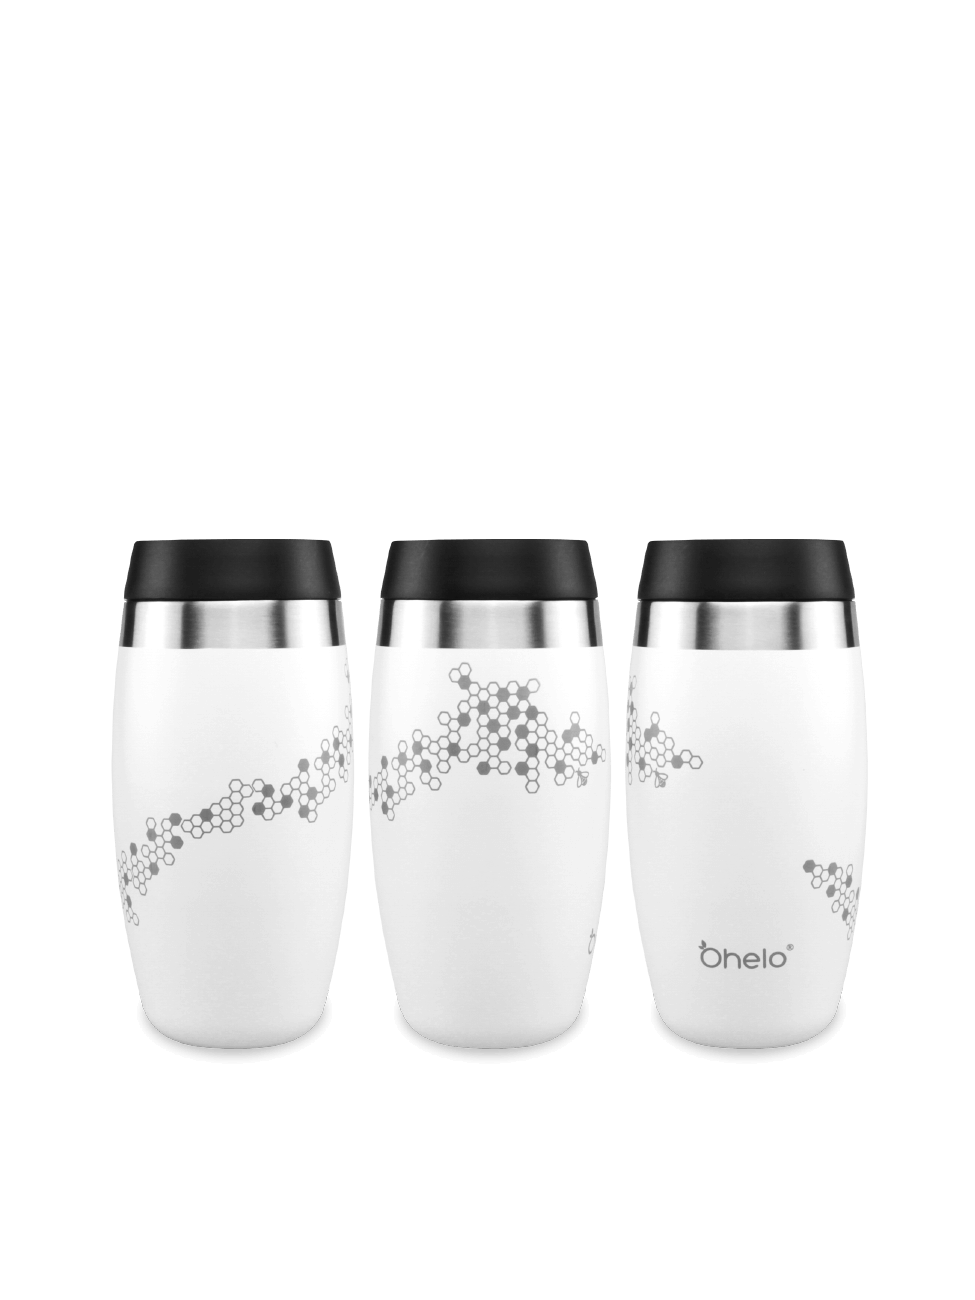 Ohelo dishwasher safe reusable coffee cup in white with honeycomb and bee design - image showing design from 3 sides